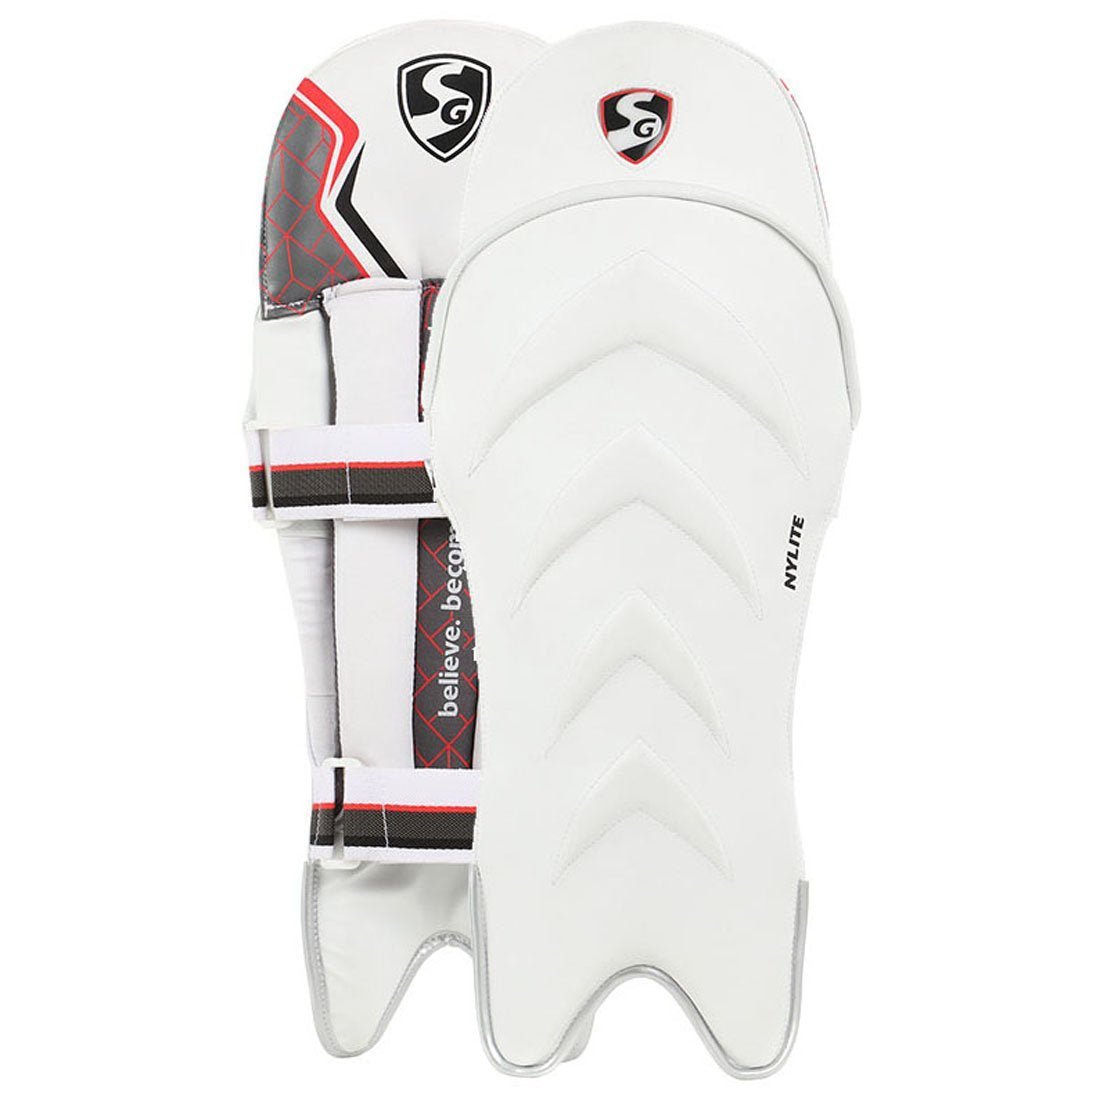 SG Nylite Cricket Wicket Keeping Pads.